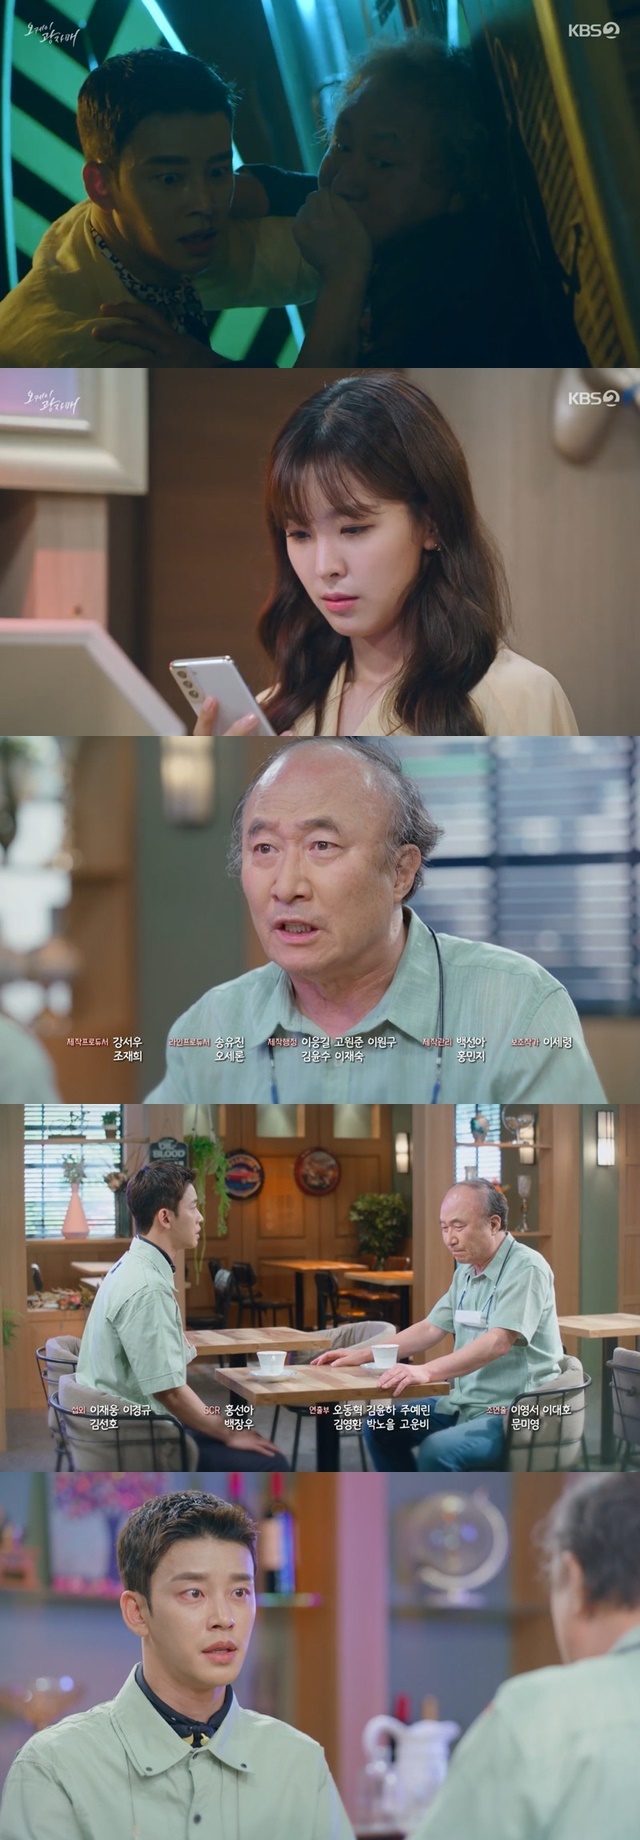 Yoon Joo-sang was surprised to know the identity of Jung Seung-ho.In the 44th episode of KBS 2TV weekend Drama OK Photo Sister (playplayplay by Moon Young-nam/directed by Lee Jin-seo), which aired on August 28, Hung Ki-jin (played by Se Jeong-hwan) knew the lie of Kim Sa-jang (Nazibum/Jeong Seung-ho).Heo Gi-jin began to treat his father-in-law when Kim, who suddenly appeared, said he was the father-in-law of his wife, Lee Kwang-tae, after the genetic tests matched.Hung Gi-jin did not inform her that her father, Kim, was in charge of the shock of her wife Lee Kwang-tae, who was in the early stages of pregnancy, and Kim demanded money from Hung Gi-jin as a bait.Kim, who found out that Huh Gi-jin is in a position to spend money at will because of his brother Huh Pung-jin (played by Joo Seok-tae), played 10 million won by playing a patient who had to write a new drug and blew it into gambling, and demanded 100 million more because he thought he was completely deceived.In the meantime, Byun Sa-chae (a good man) investigated Kim with a bluff order and gave a speech to Huh Gi-jin, and Hung Gi-jin knew Kims lie.Kim saw a change of patient clothes in a hospital toilet and headed to a gambling place.Hung Gi-jin was angry at Kim, saying, Do not contact me again, but Kim immediately called Lee Kwang-tae, and Hung Gi-jin barely stopped Kim.